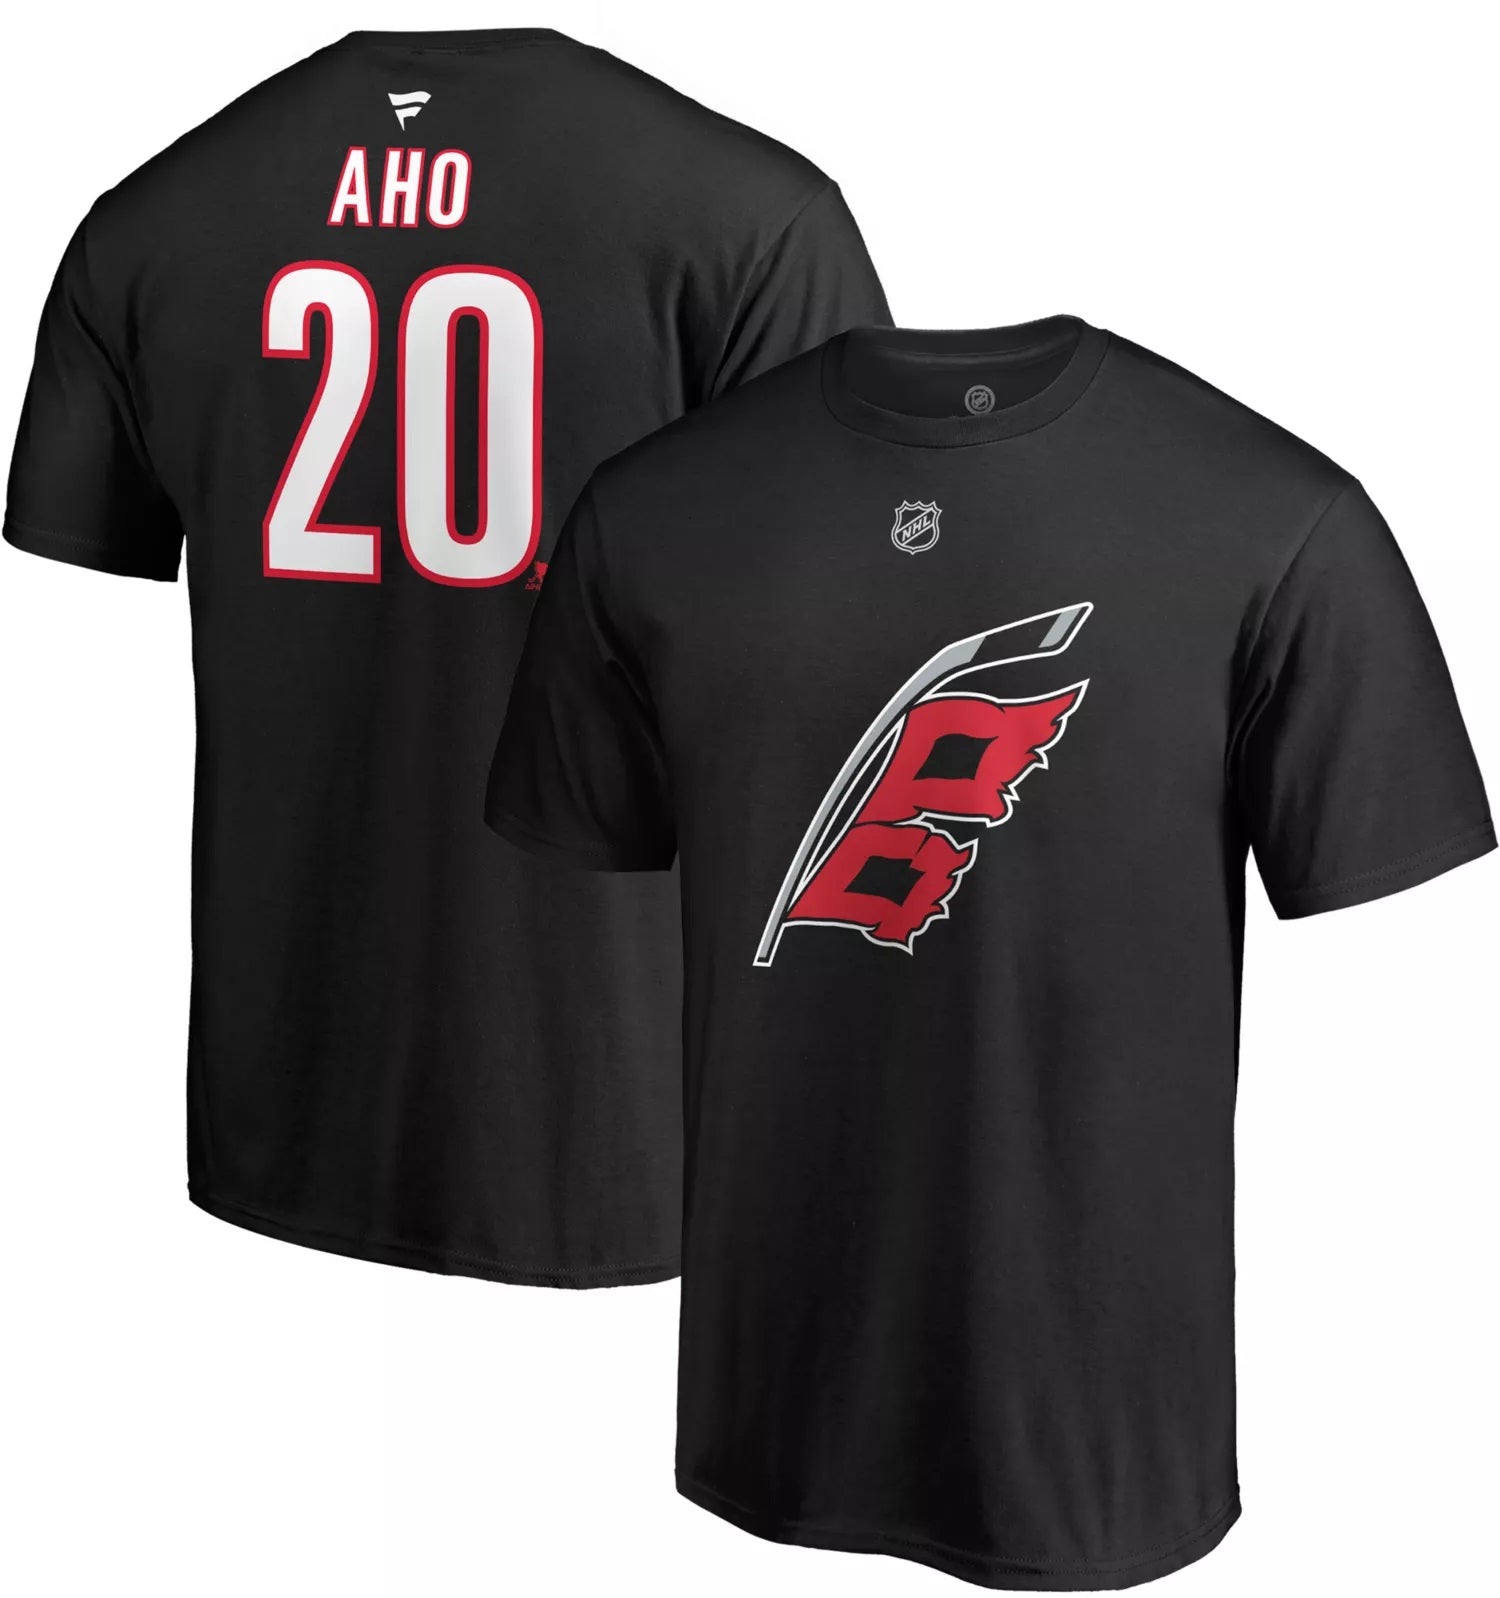 Sebastian Aho Jersey Sticker Essential T-Shirt for Sale by ayeshab6wc